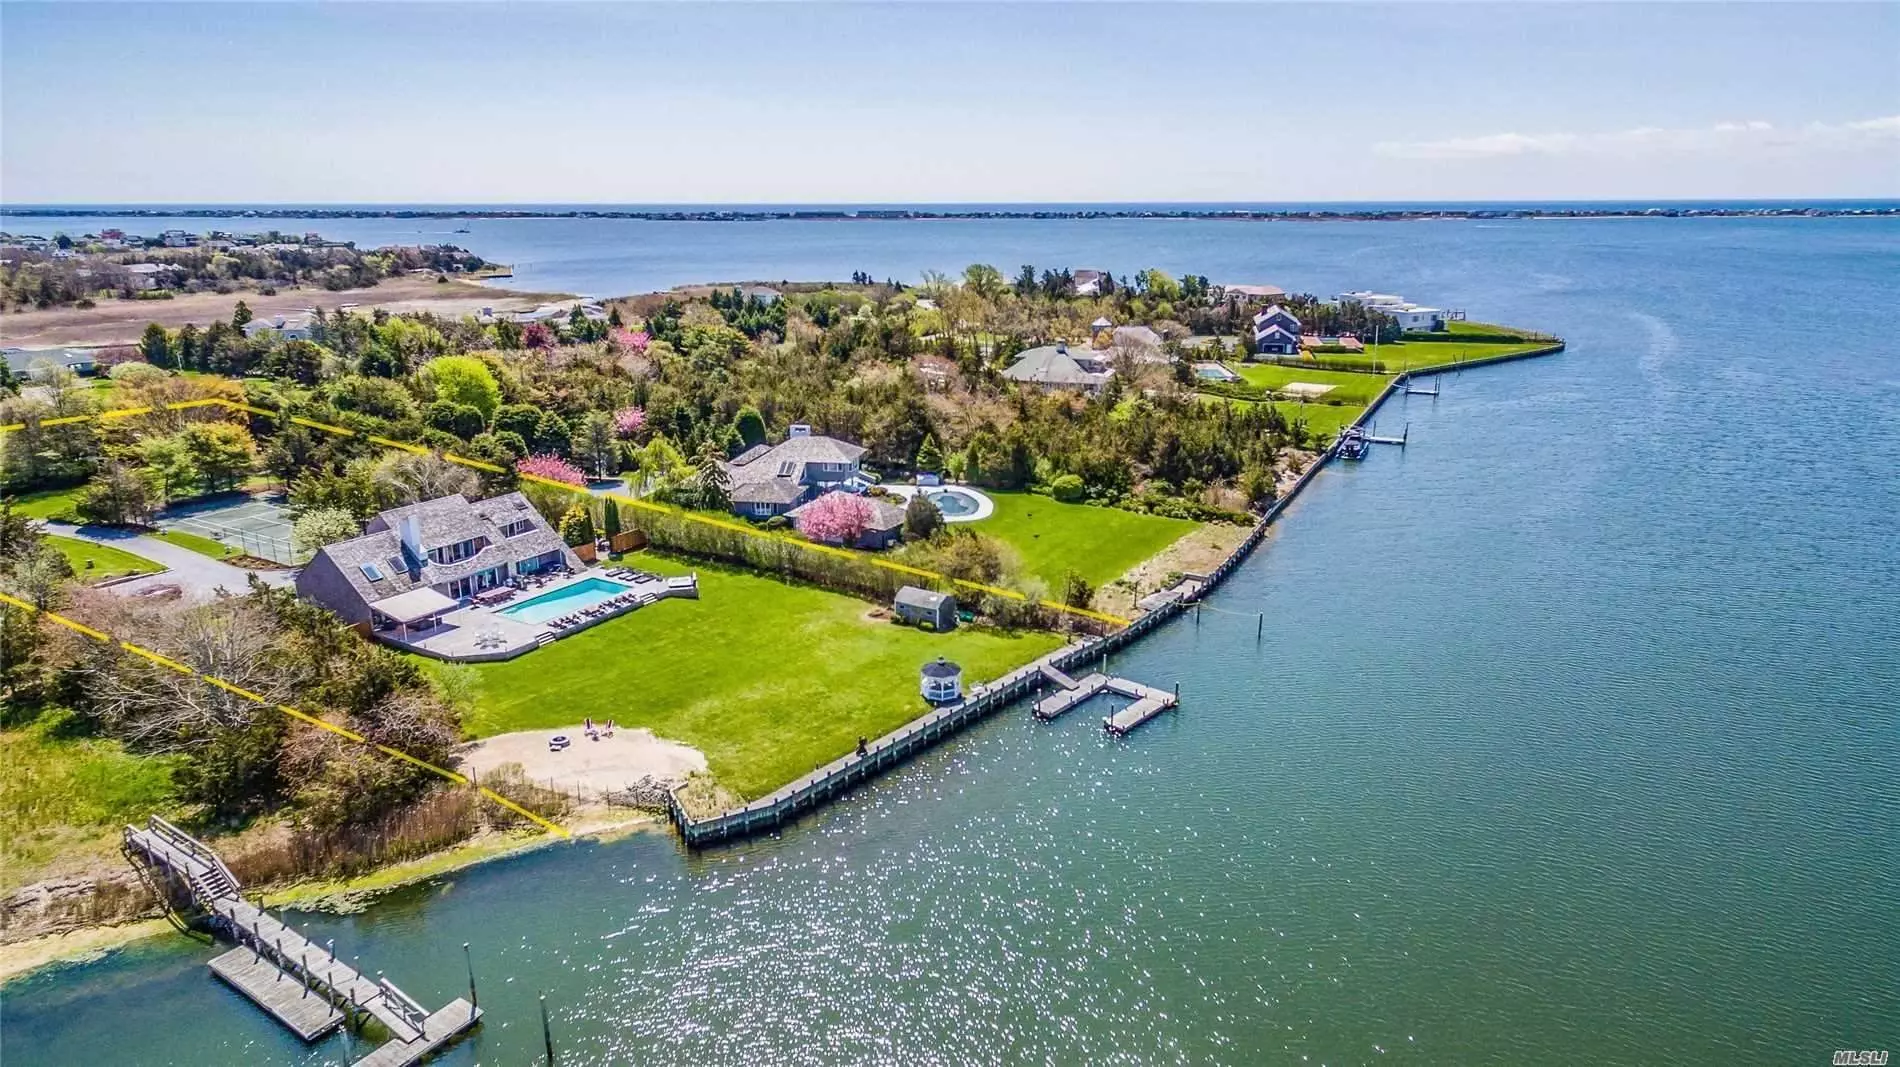 WIDE OPEN WATERFRONT, 1.64 Acres in Prestigious Atlantic Farms in Westhampton with homes valued up to $10, 000, 000. 140 Feet of Bulkhead, Deep Water, Huge Floating Dock, Sandy Beach, Heated Gunite Pool, Hardwood Decking, Expansive Lawn, Har-Tru Tennis Court, Totally Private Setting. Beautiful Sunsets, Large Chefs Kitchen with Fireplace 4 Bedroom, 4 Bath, Living room with high ceiling and Fireplace. Garage. Finished Basement with large Bedroom and a Full Bath possible, Owner has applied for Permits, Exercise room and plenty of storage.